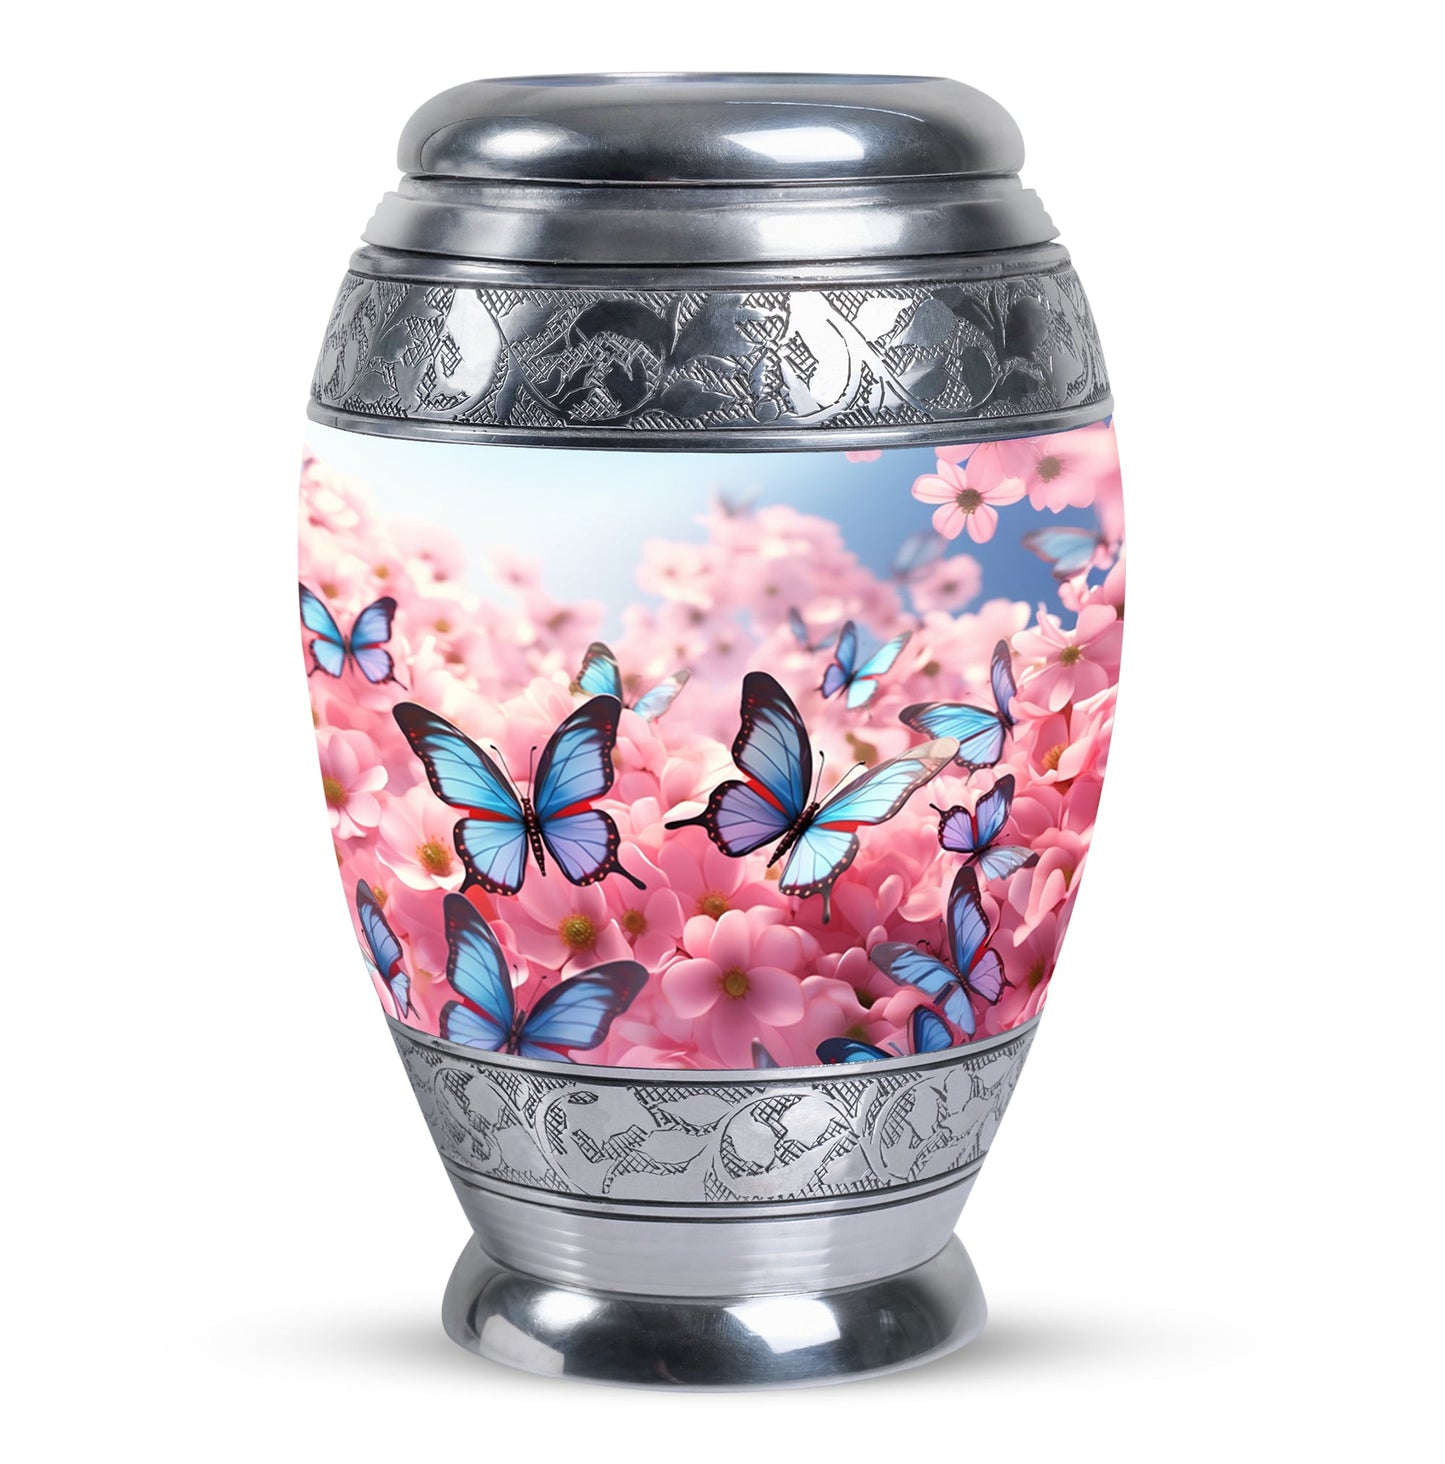 Blue Flying Butterfly on Pink Meadow | Large Cremation Urn For Ashes